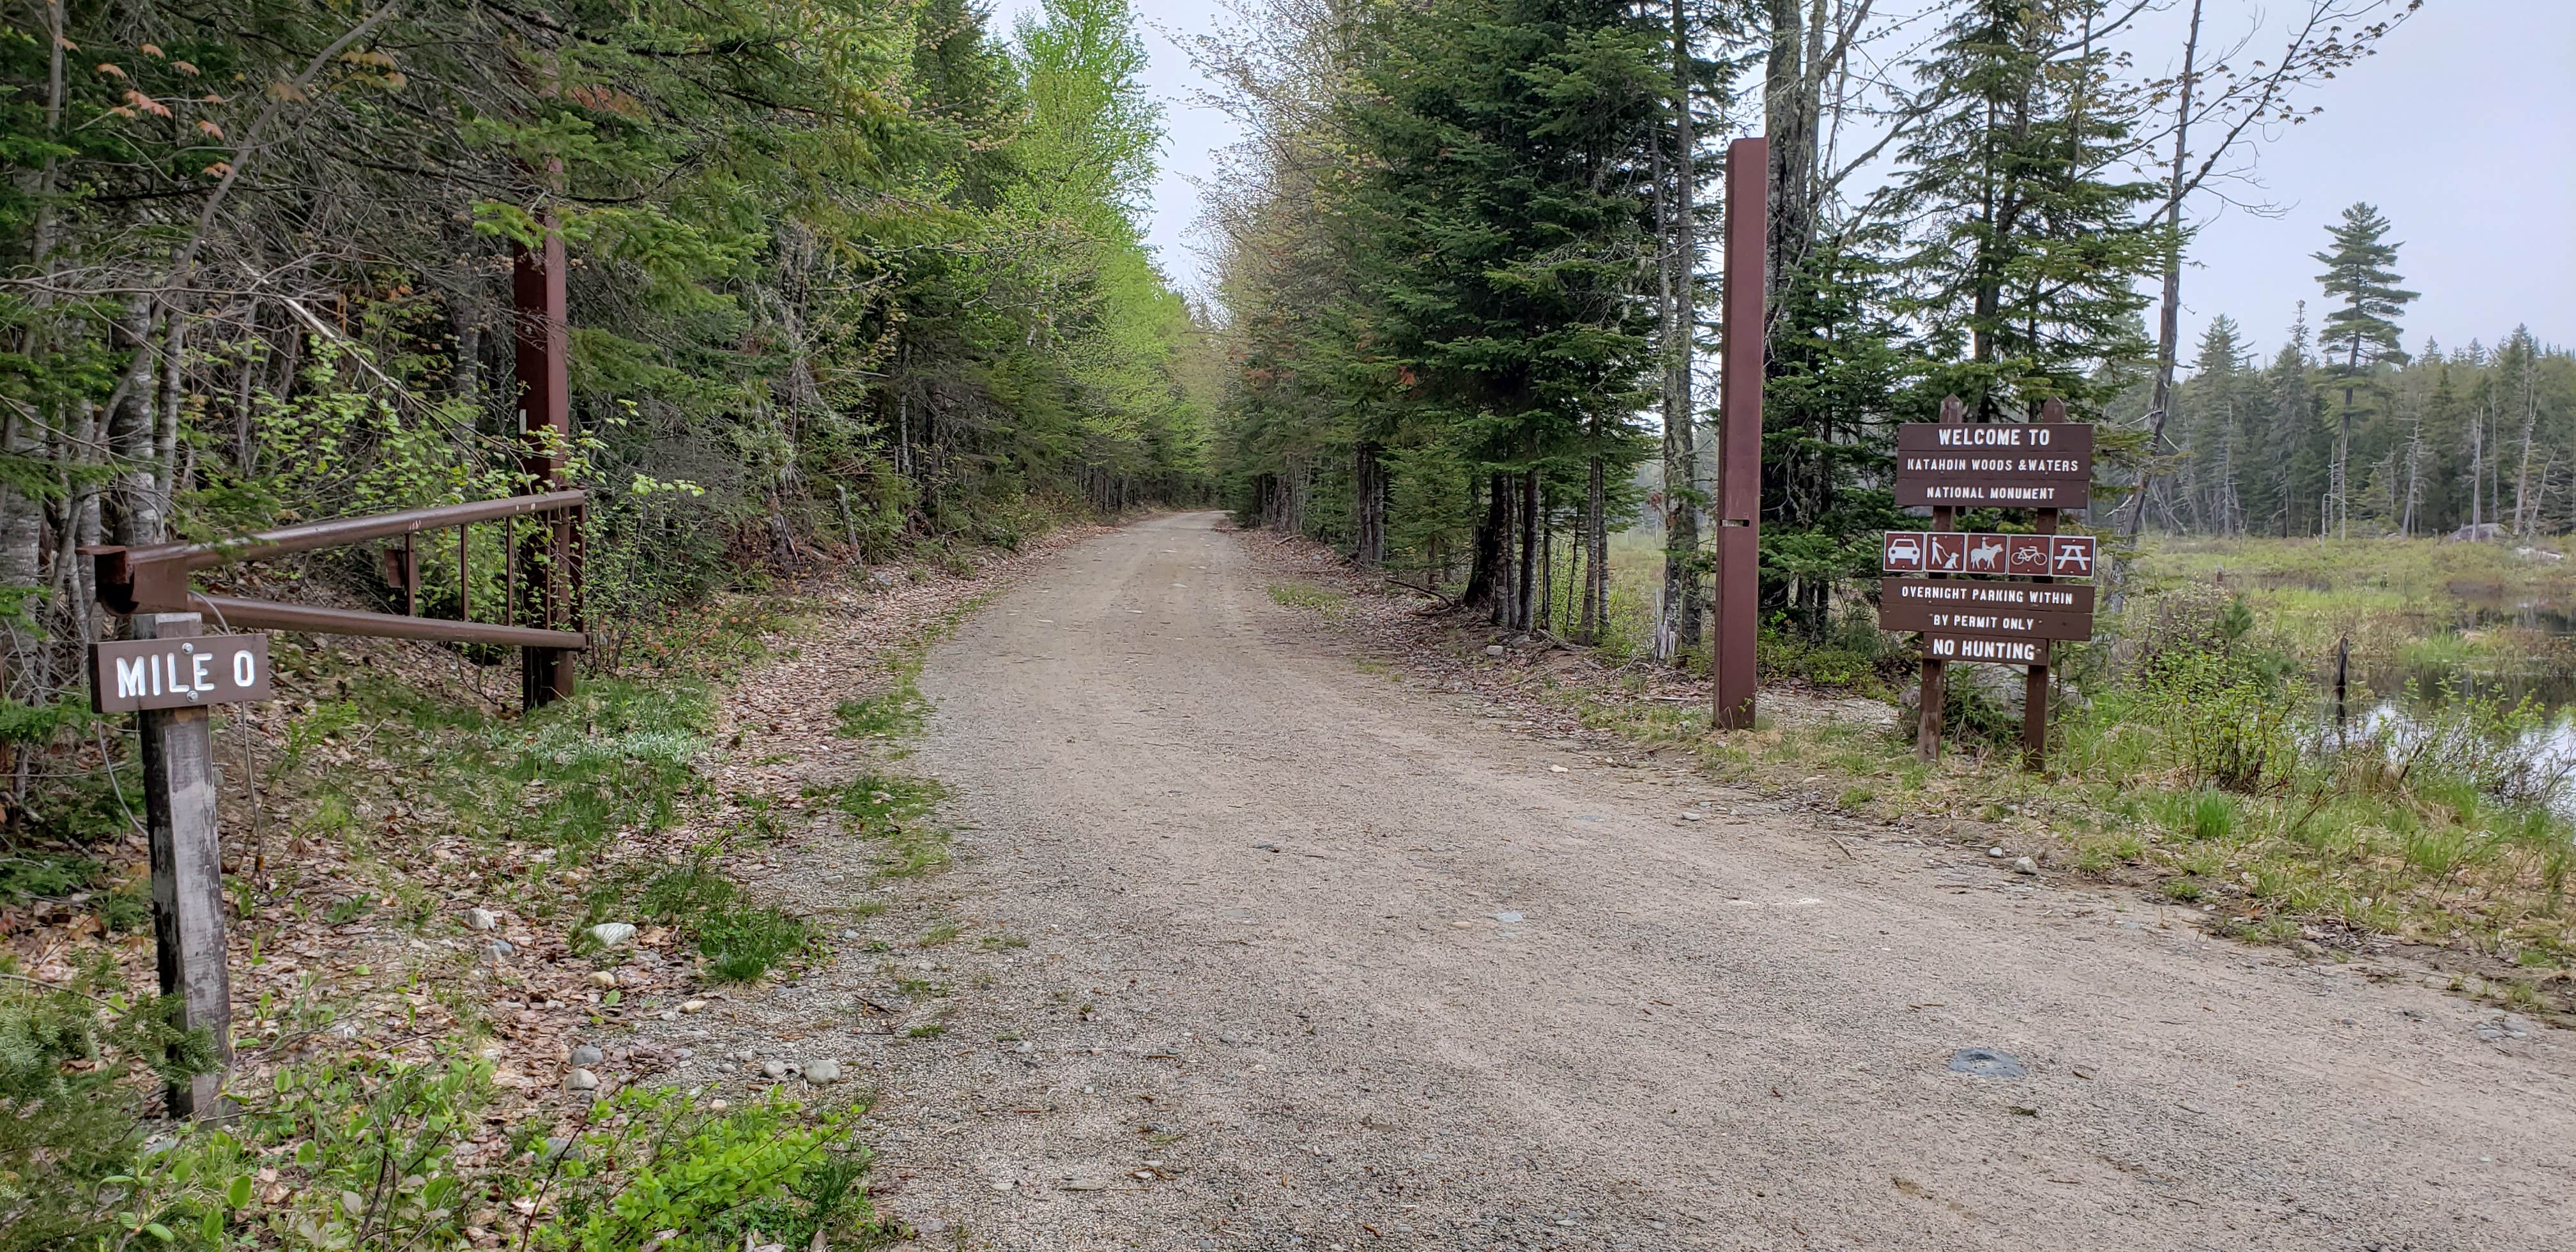 Entrance to the Katahdin Woods and Waters Loop Road